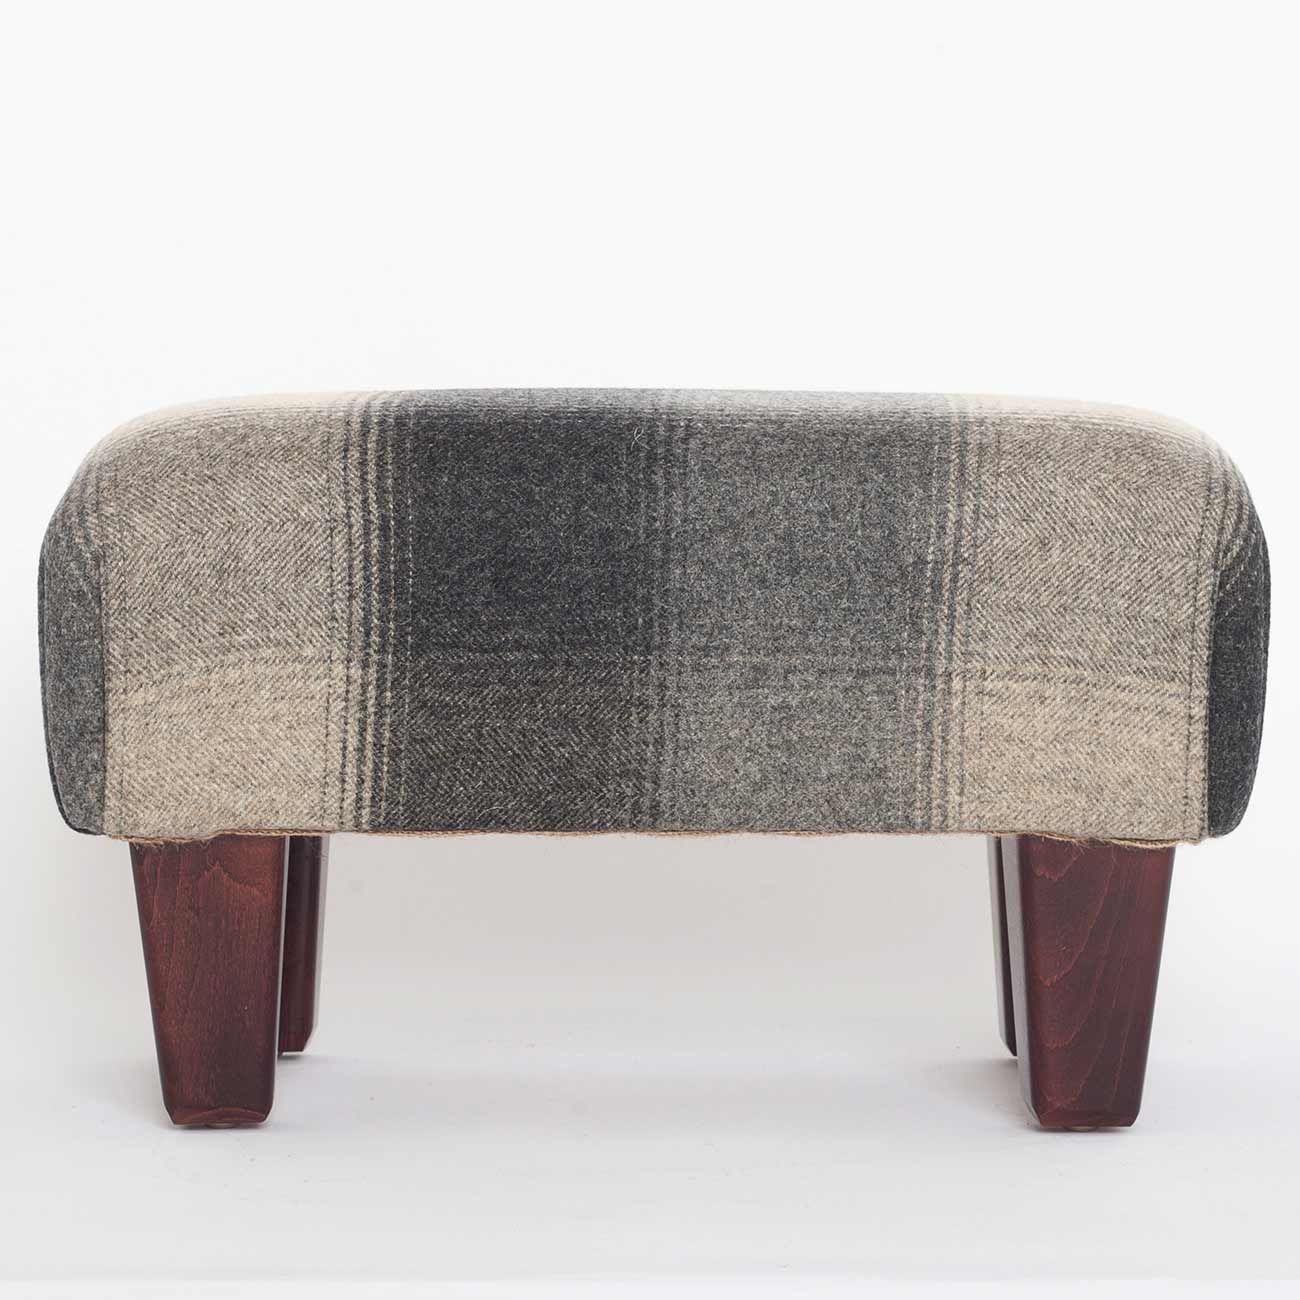 grey-squares-footstool5 fabric from JLP